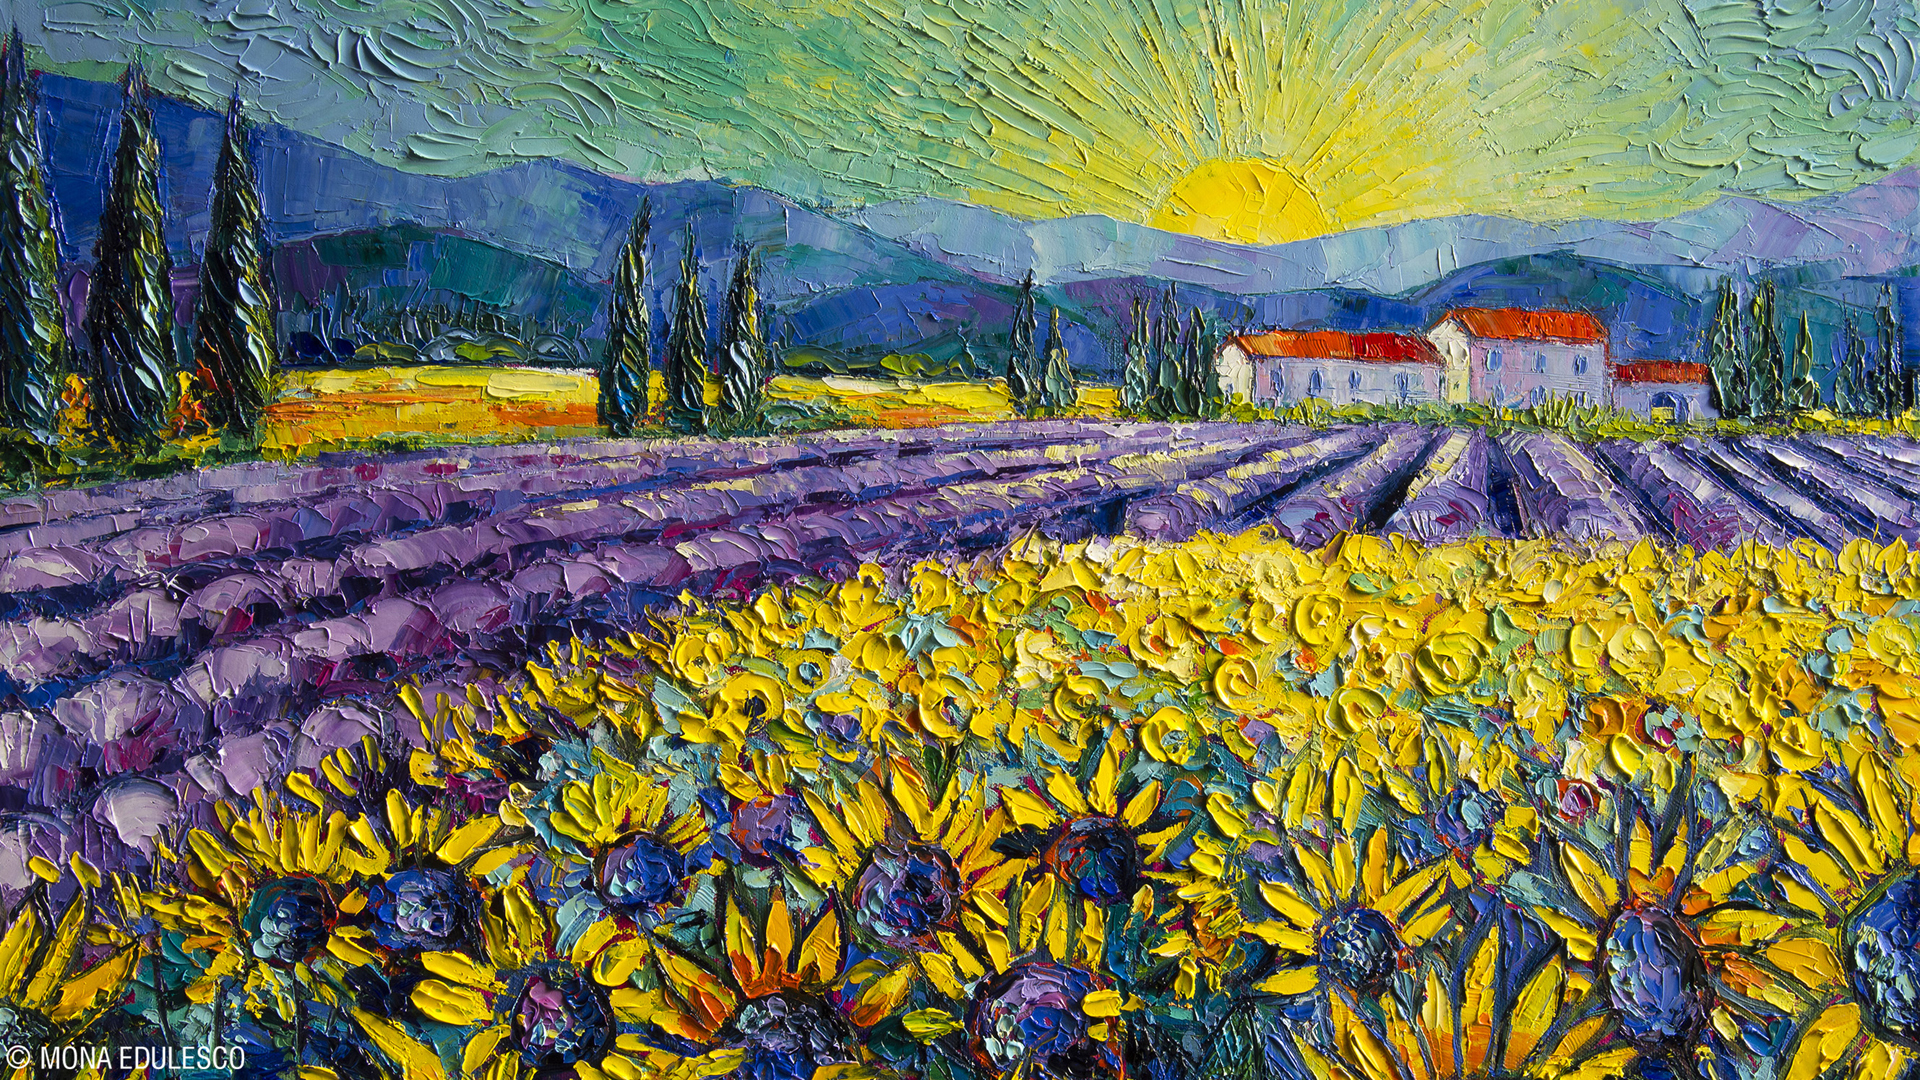 You And Art Magazine Sunflowers And Lavender Mona Edulesco - Painting Acrylic Lavender Field - HD Wallpaper 